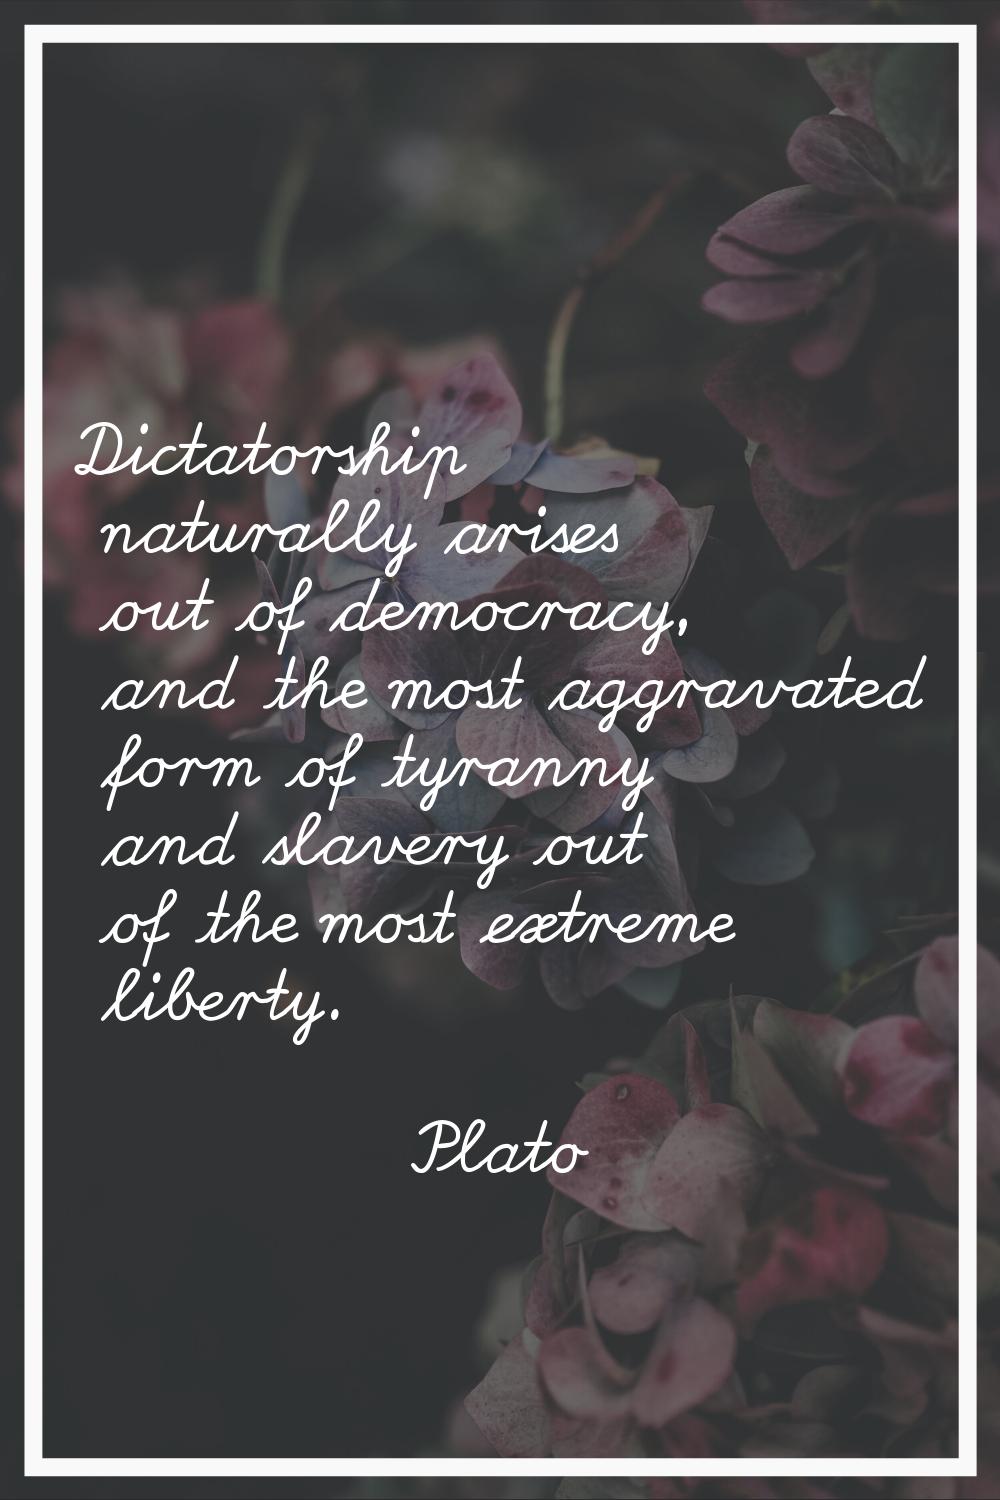 Dictatorship naturally arises out of democracy, and the most aggravated form of tyranny and slavery